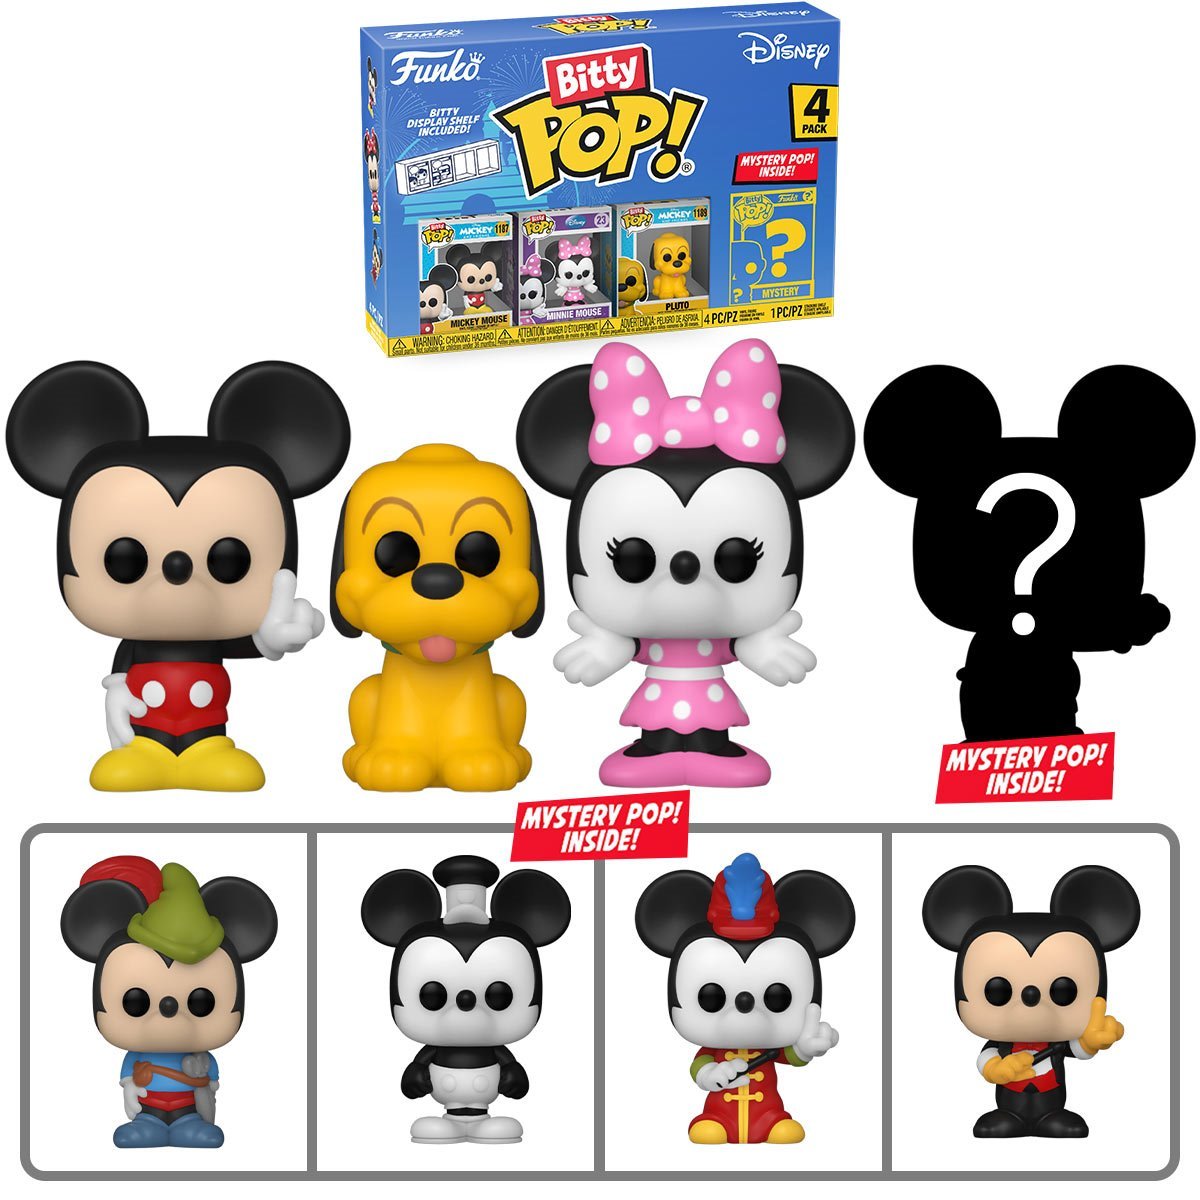 Ultimate Funko Pop Mickey Mouse Figures Checklist and Gallery